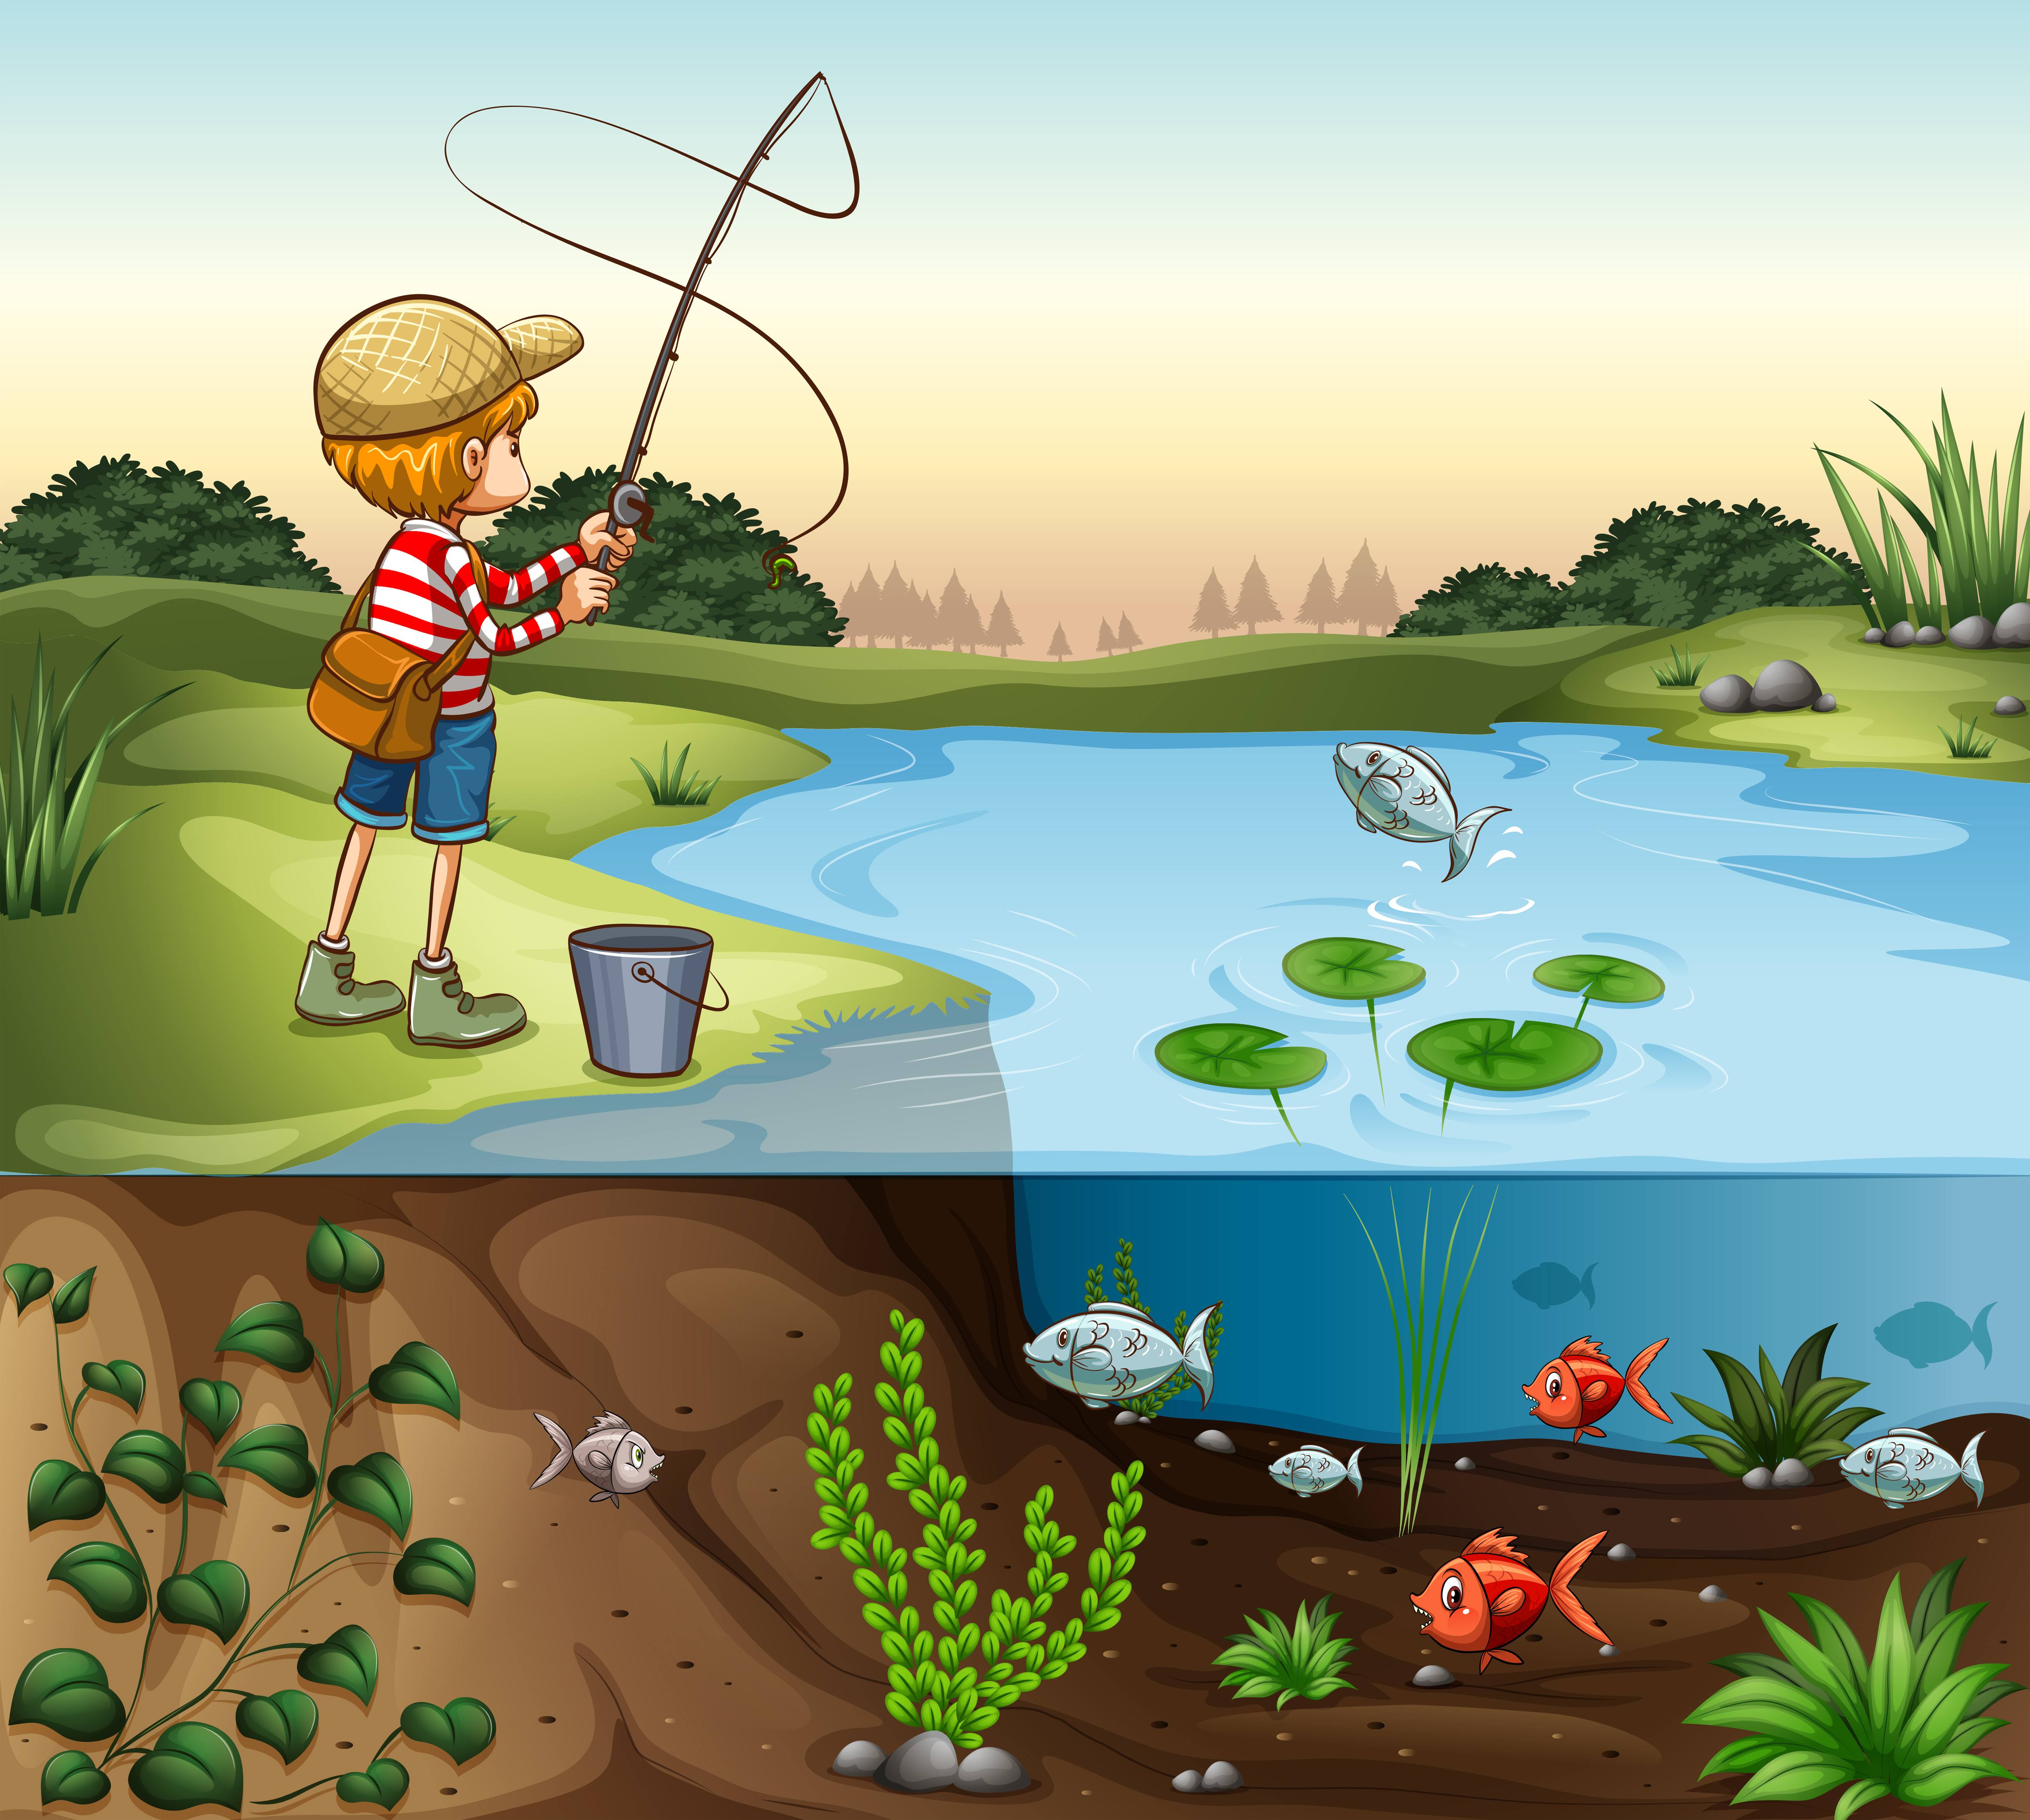 https://static.vecteezy.com/system/resources/previews/000/667/063/original/boy-on-the-river-bank-fishing-alone.jpg